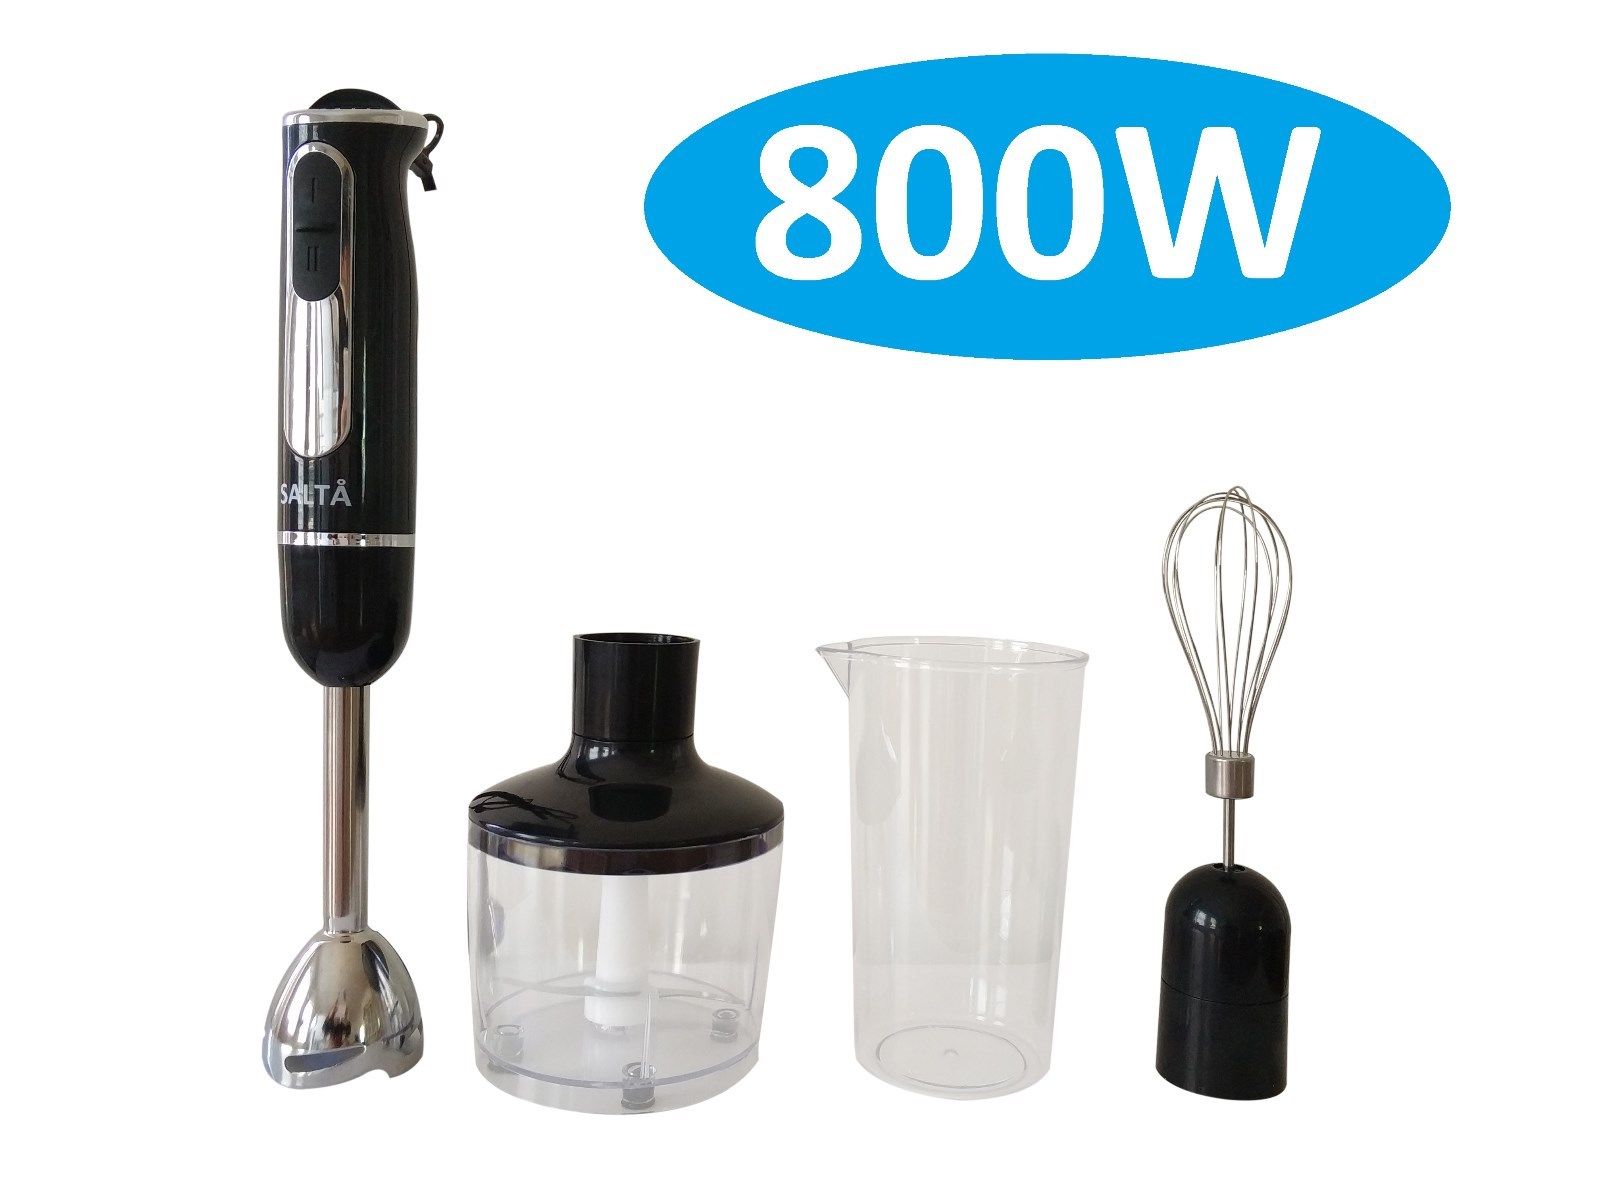 800W 4 in 1 Stainless Steel Portable Stick Hand Blender Set Mixer Food Processor egg whisk